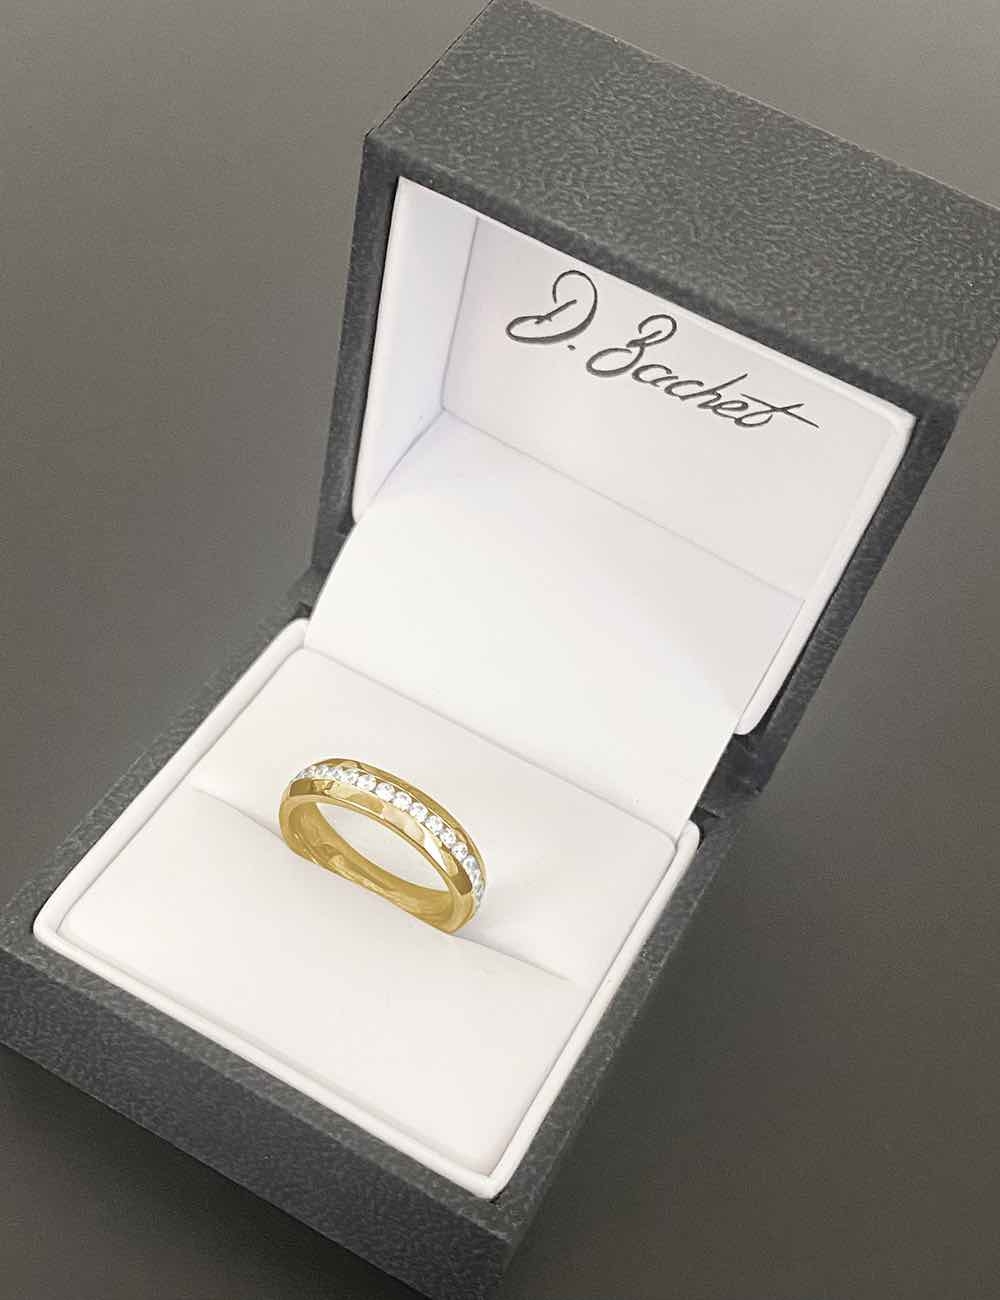 A luxury wedding ring for women fully handmade in our workshop in yellow gold and white diamonds.